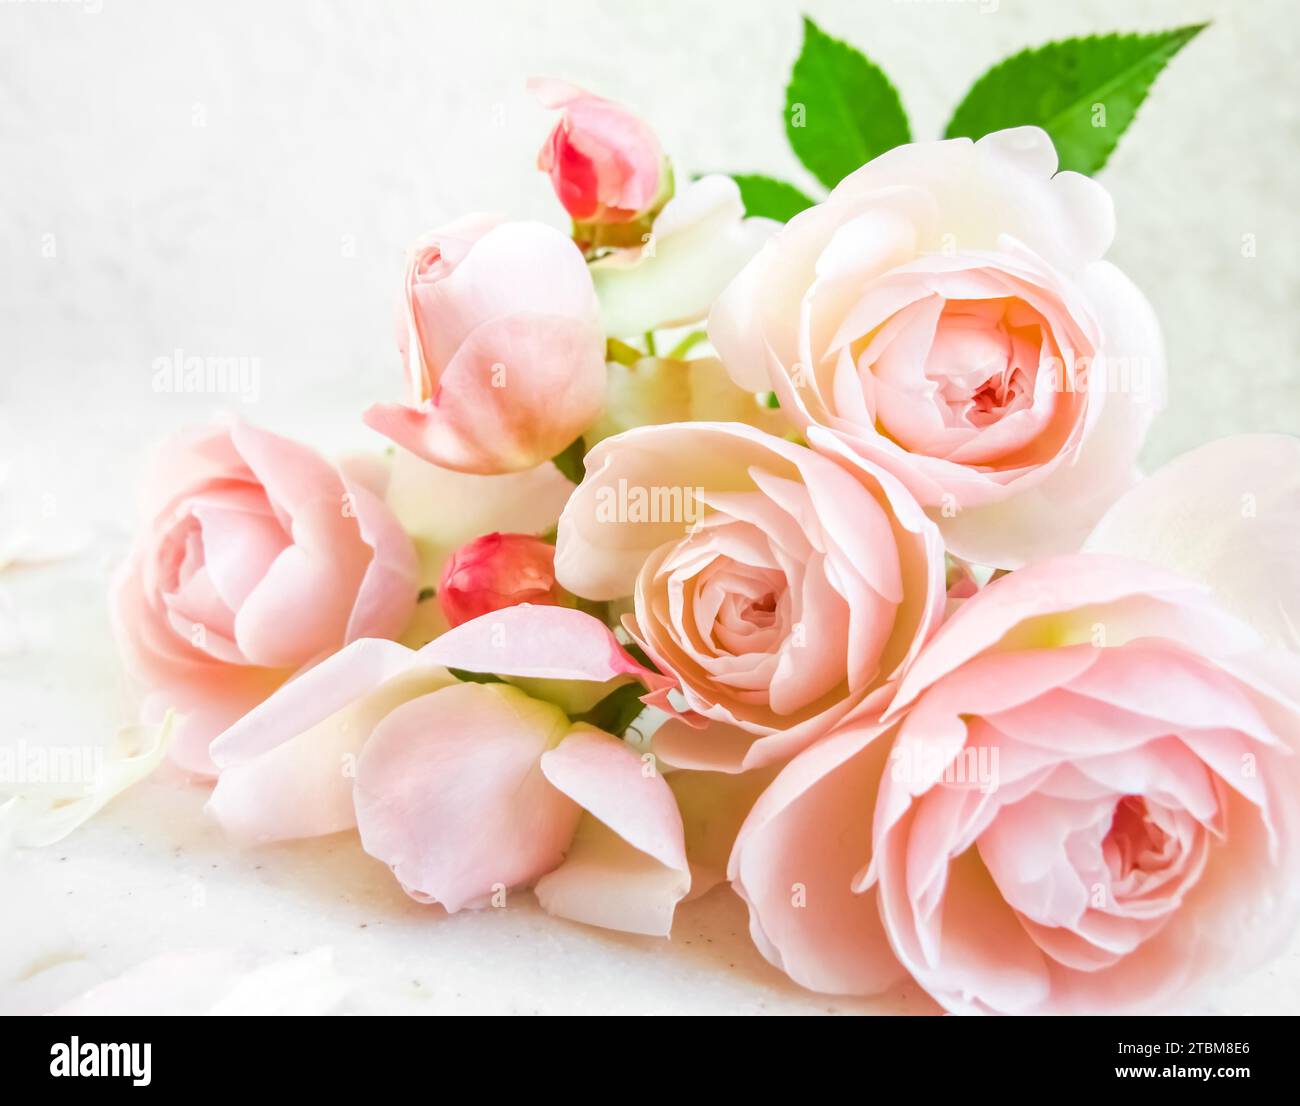 Valentines Day Rose : Pink Card - Stock Photos Stock Photo - Image of  backdrop, evening: 36181104, Pink Card Stock 